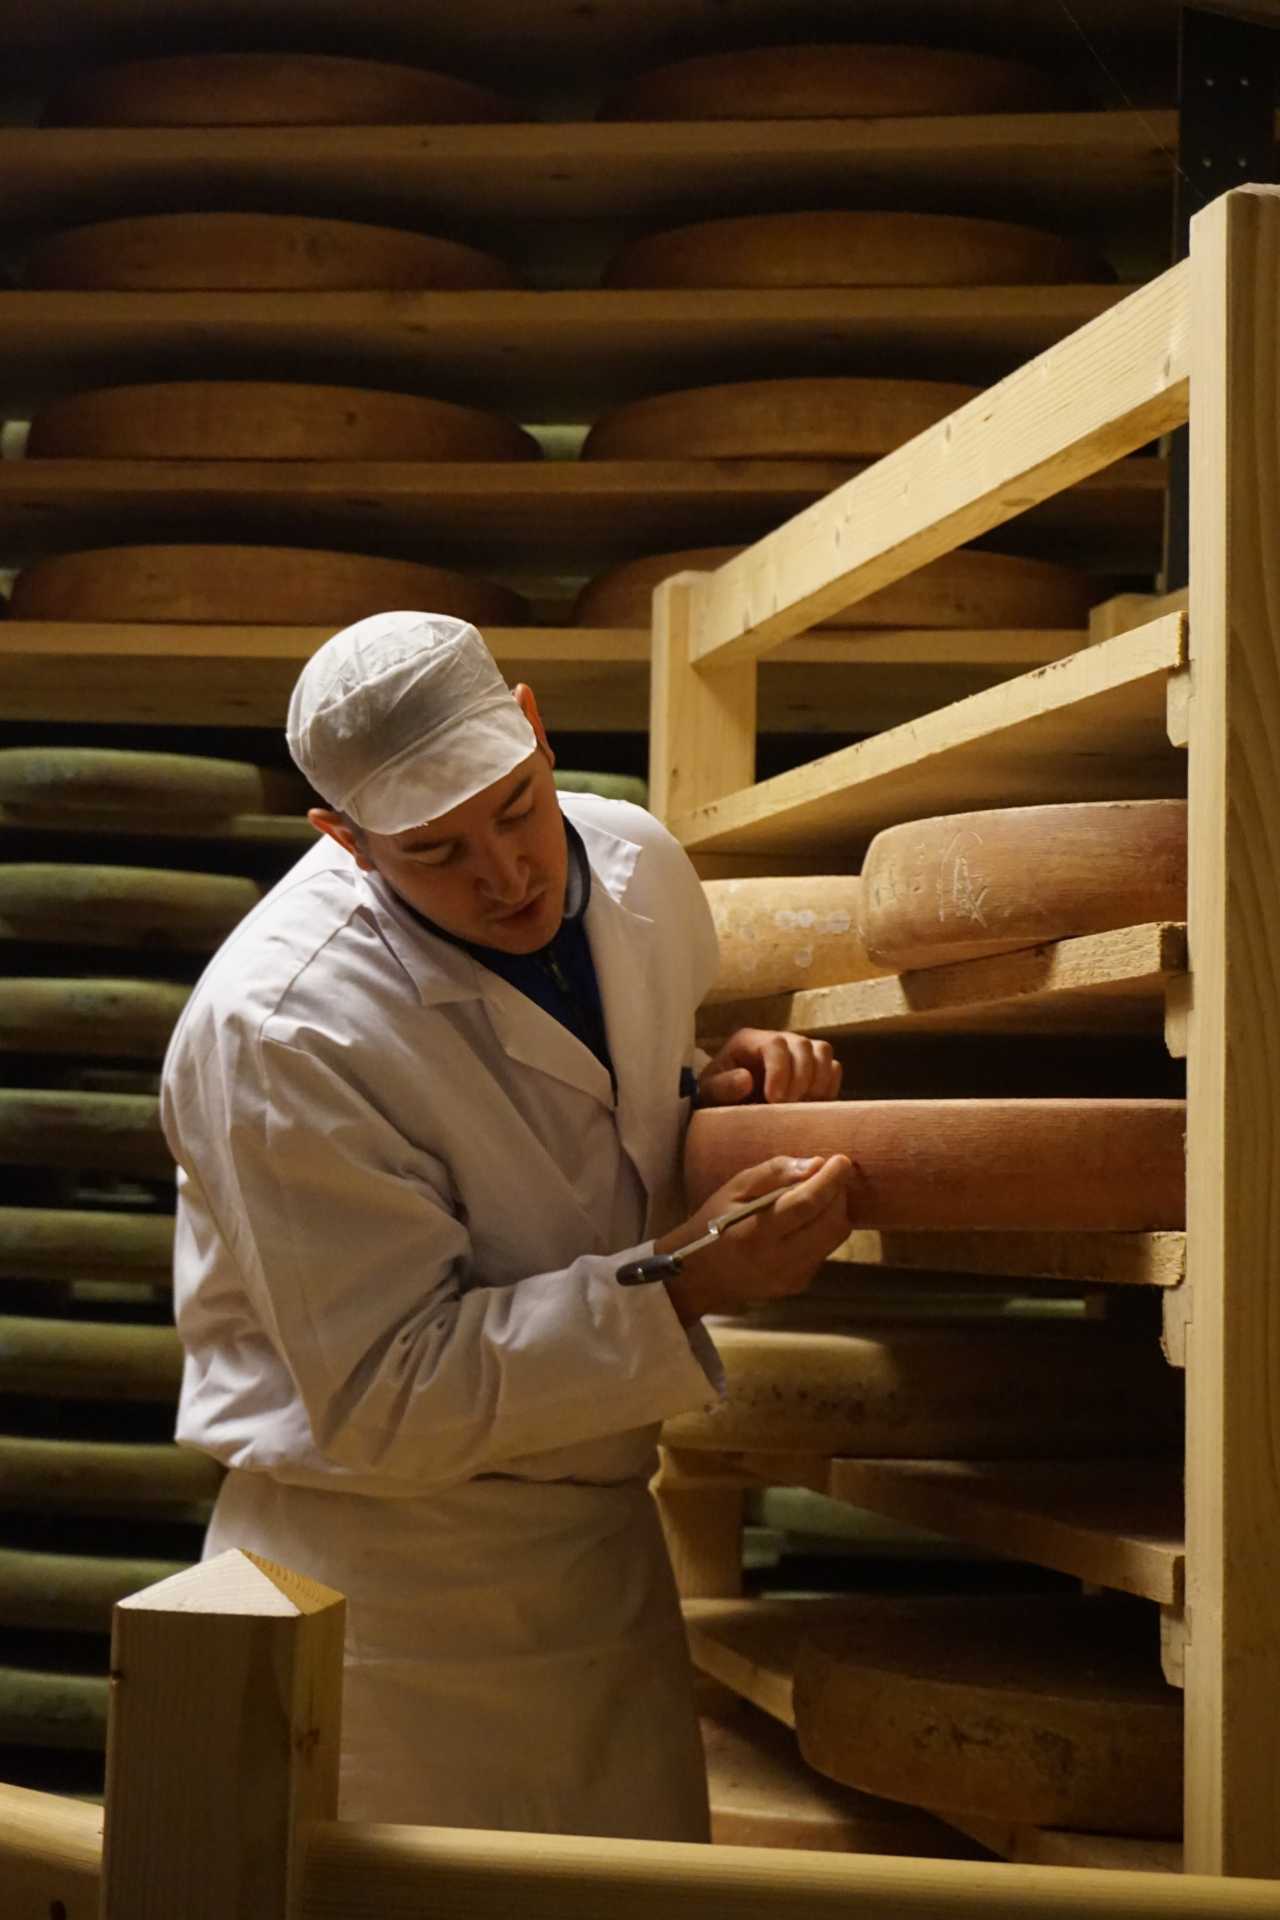 An artisan working on Comte cheese in Jura, France